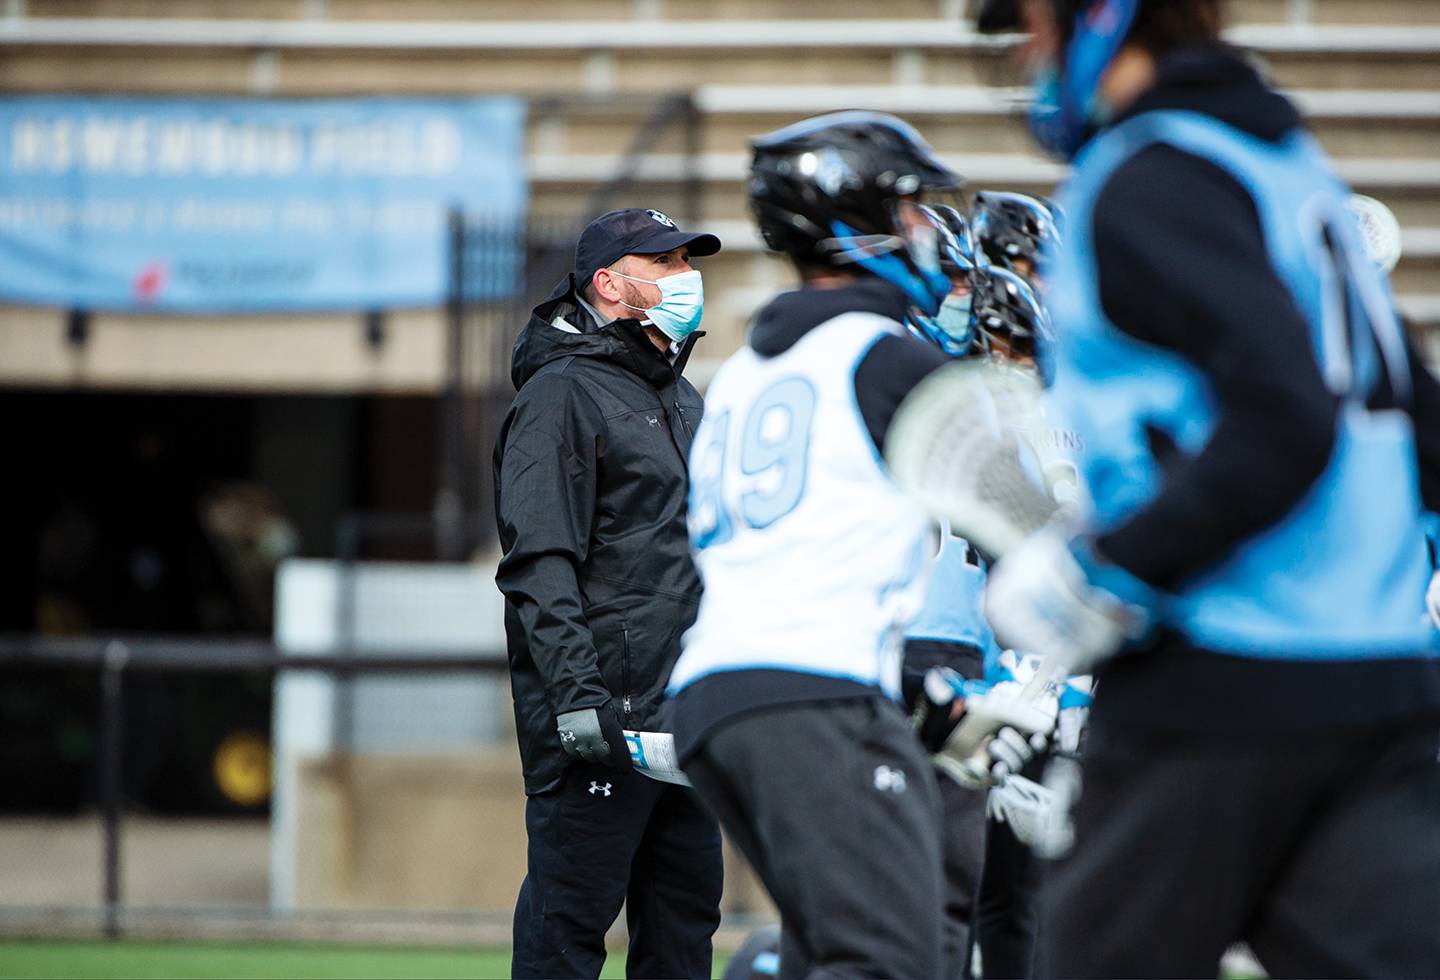 Coach Pete Milliman, wearing a face mask, watches lacrosse practice